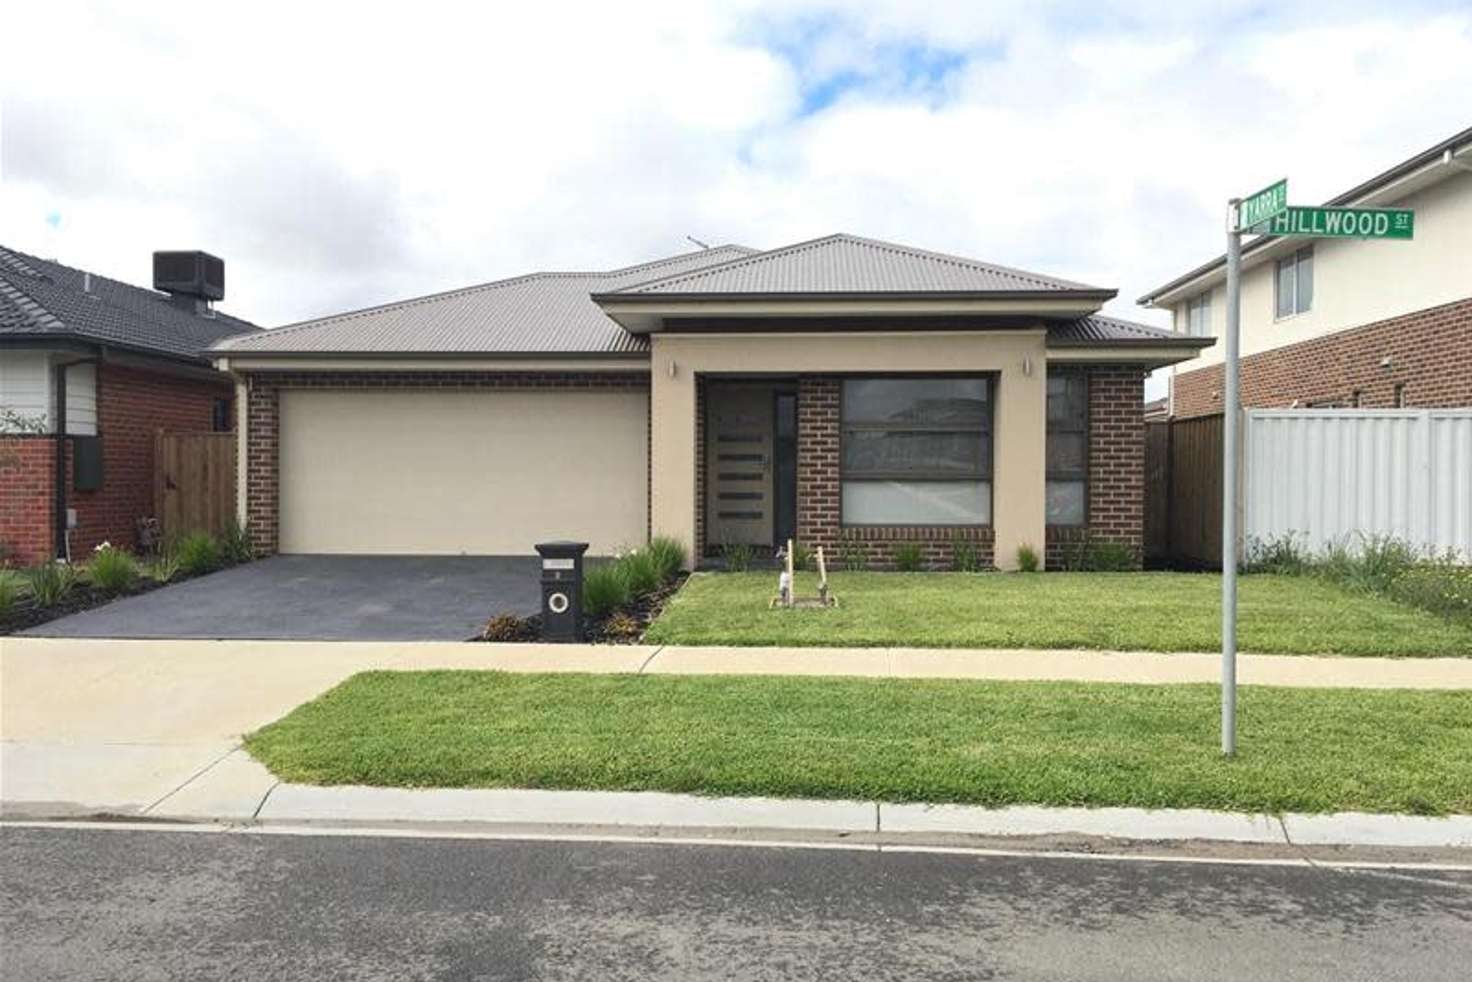 Main view of Homely house listing, 9 Hillwood Street, Clyde VIC 3978